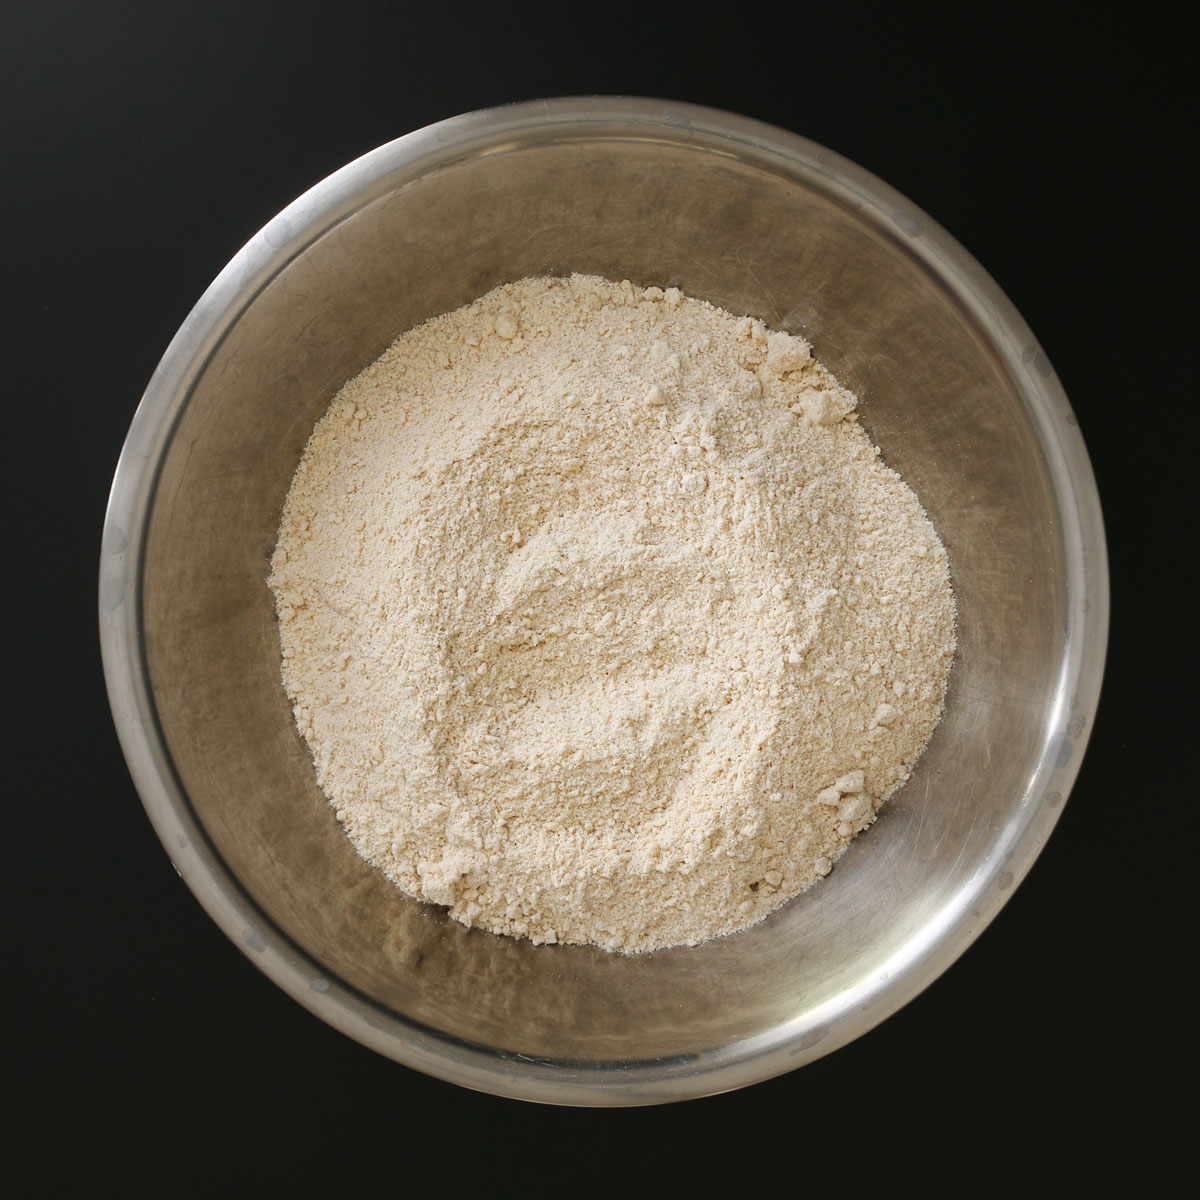 crumb mixture transferred to a large mixing bowl.